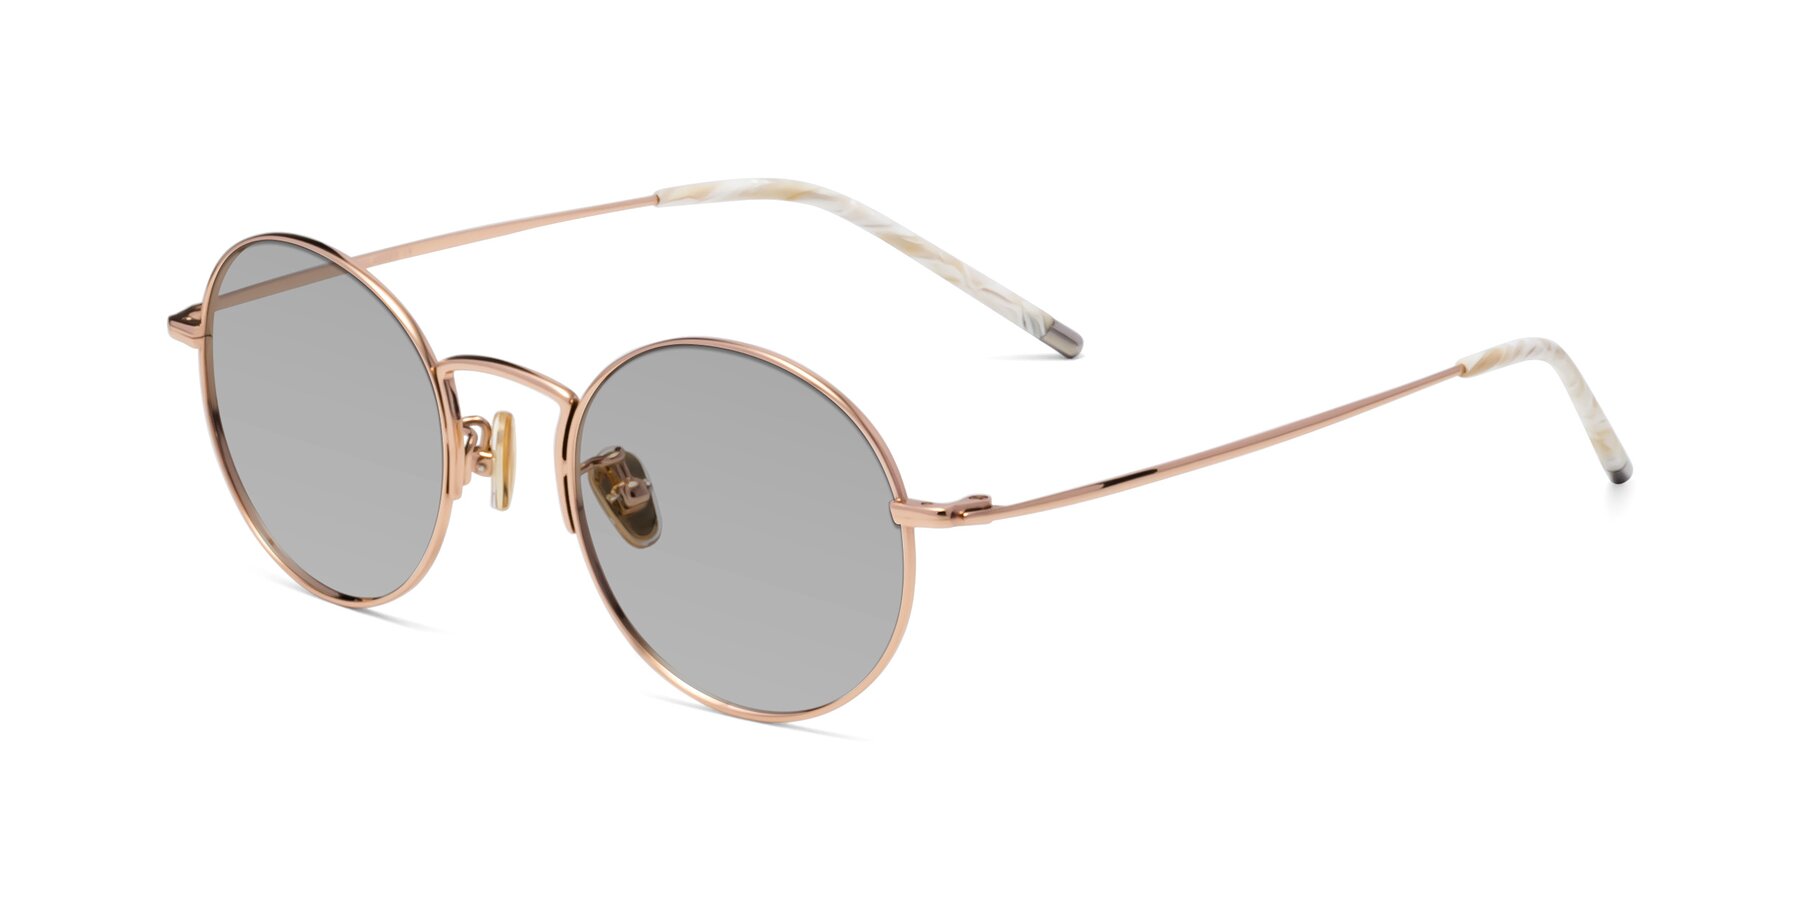 Angle of 80033 in Rose Gold with Light Gray Tinted Lenses